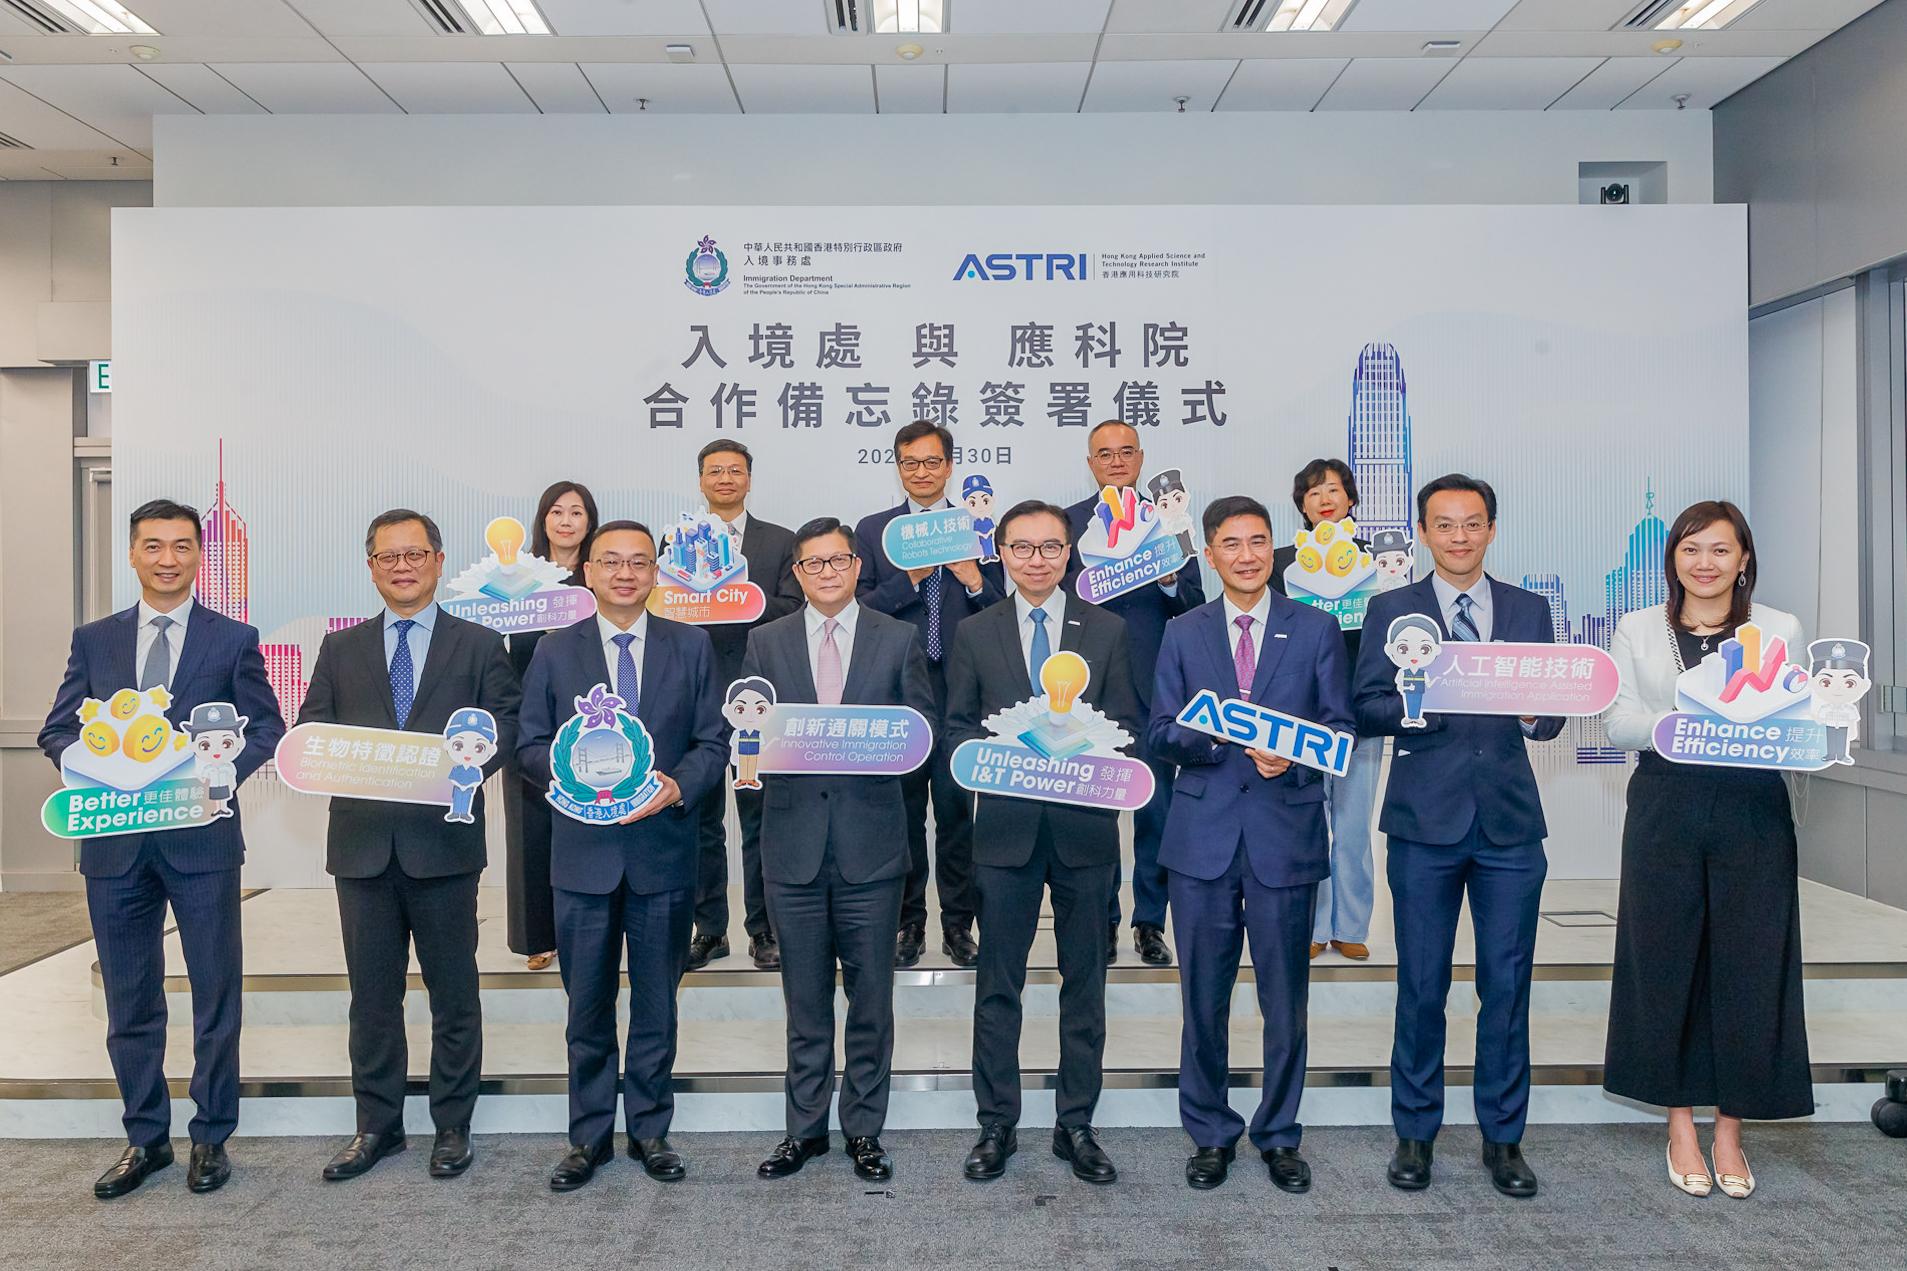 The Immigration Department and the Hong Kong Applied Science and Technology Research Institute (ASTRI) signed a Memorandum of Understanding today (April 30) to promote innovative technologies in public services. Photo shows (front row, from second left) the Deputy Director of Immigration (Enforcement, Systems and Management), Mr Tai Chi-yuen; the Director of Immigration, Mr Benson Kwok; the Secretary for Security, Mr Tang Ping-keung; the Board Chairman of ASTRI, Mr Sunny Lee; the Chief Executive Officer of ASTRI, Dr Denis Yip, with other guests at the signing ceremony.